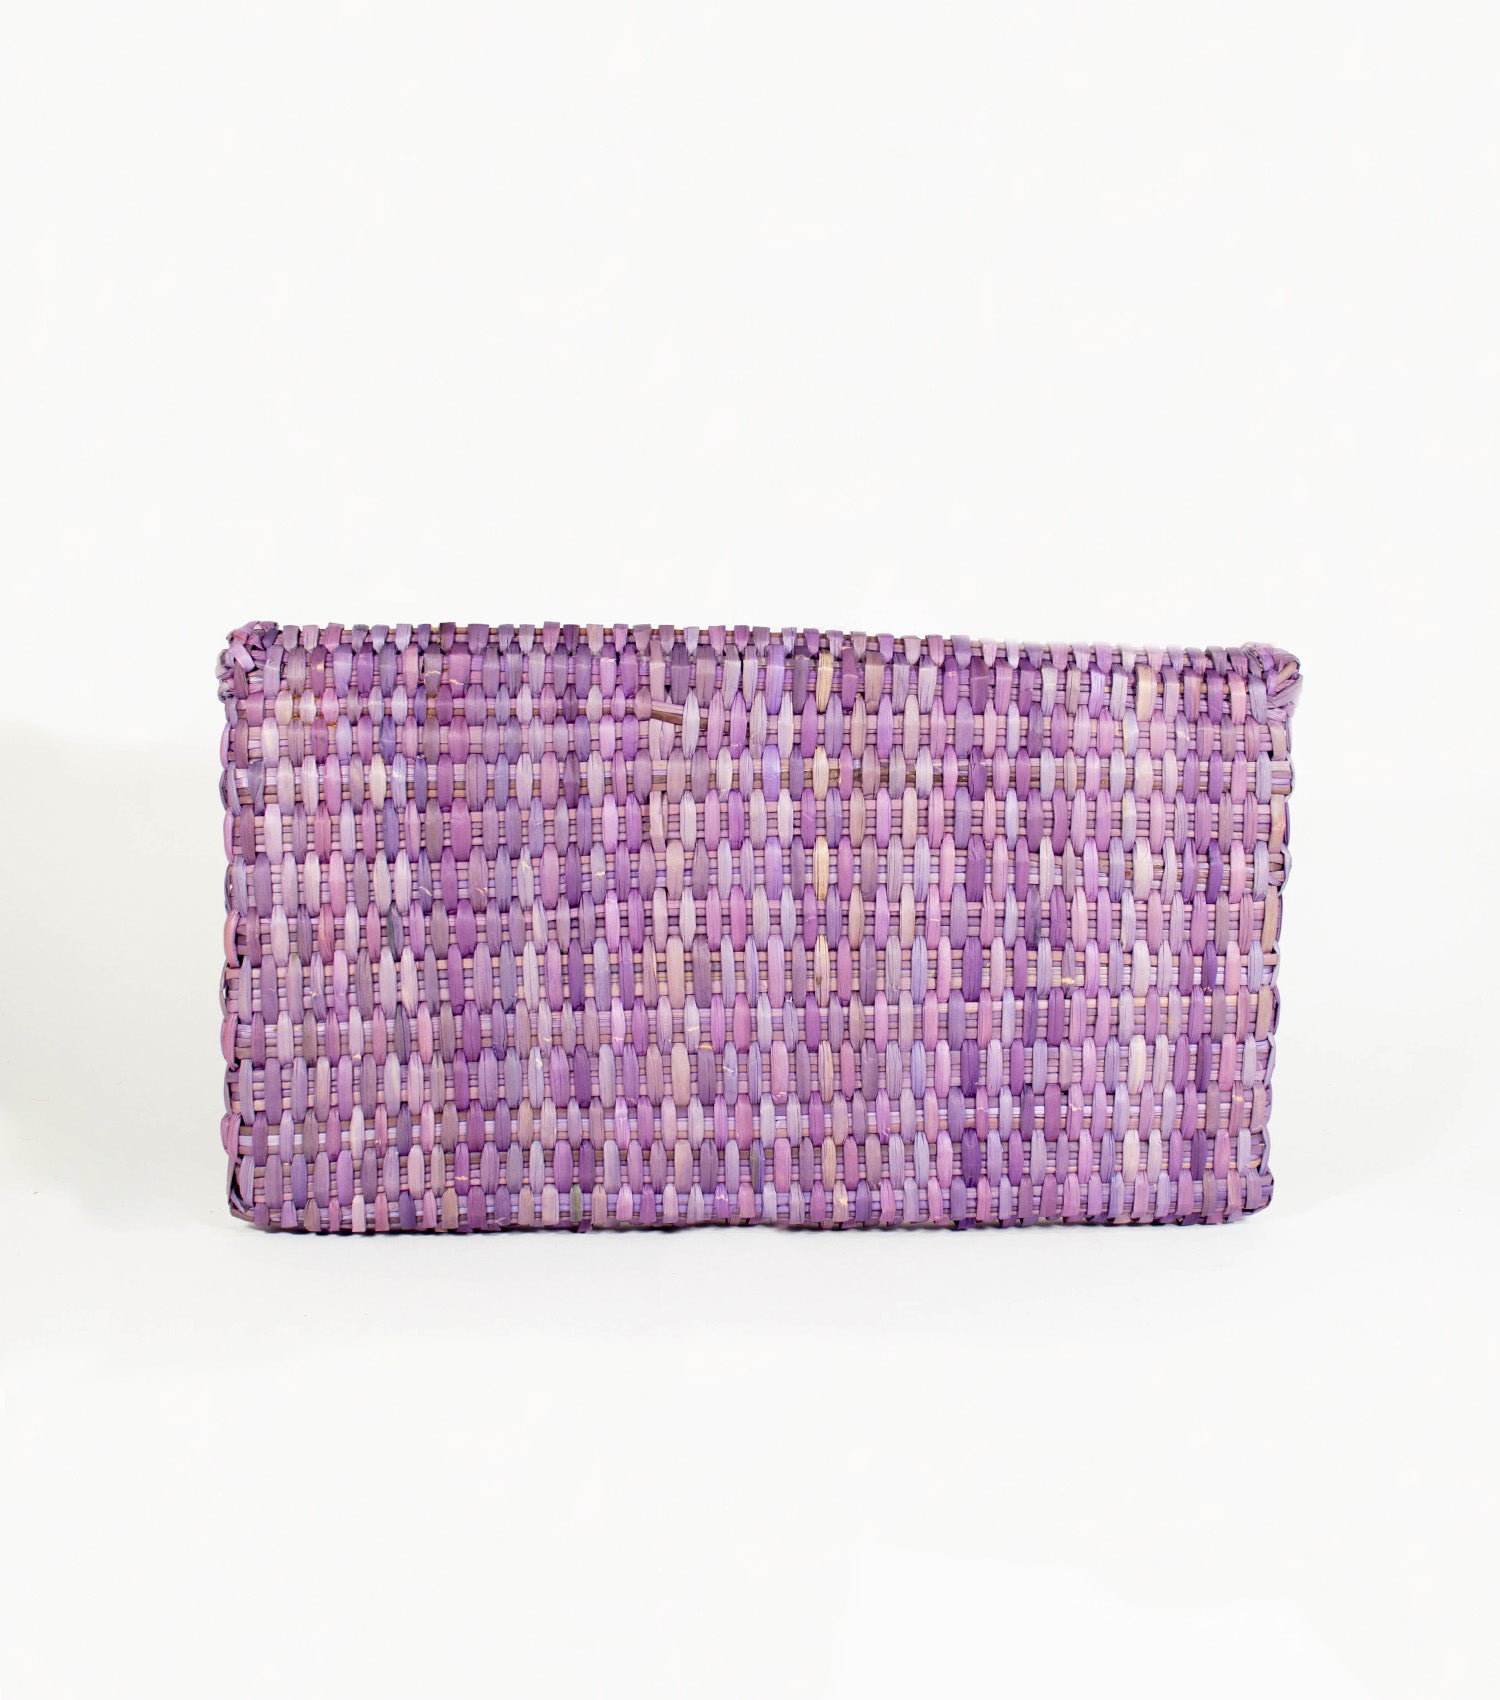 Back view of Lima Clutch - Lilac enriched by meticulous stitching and artisanal attention to detail.